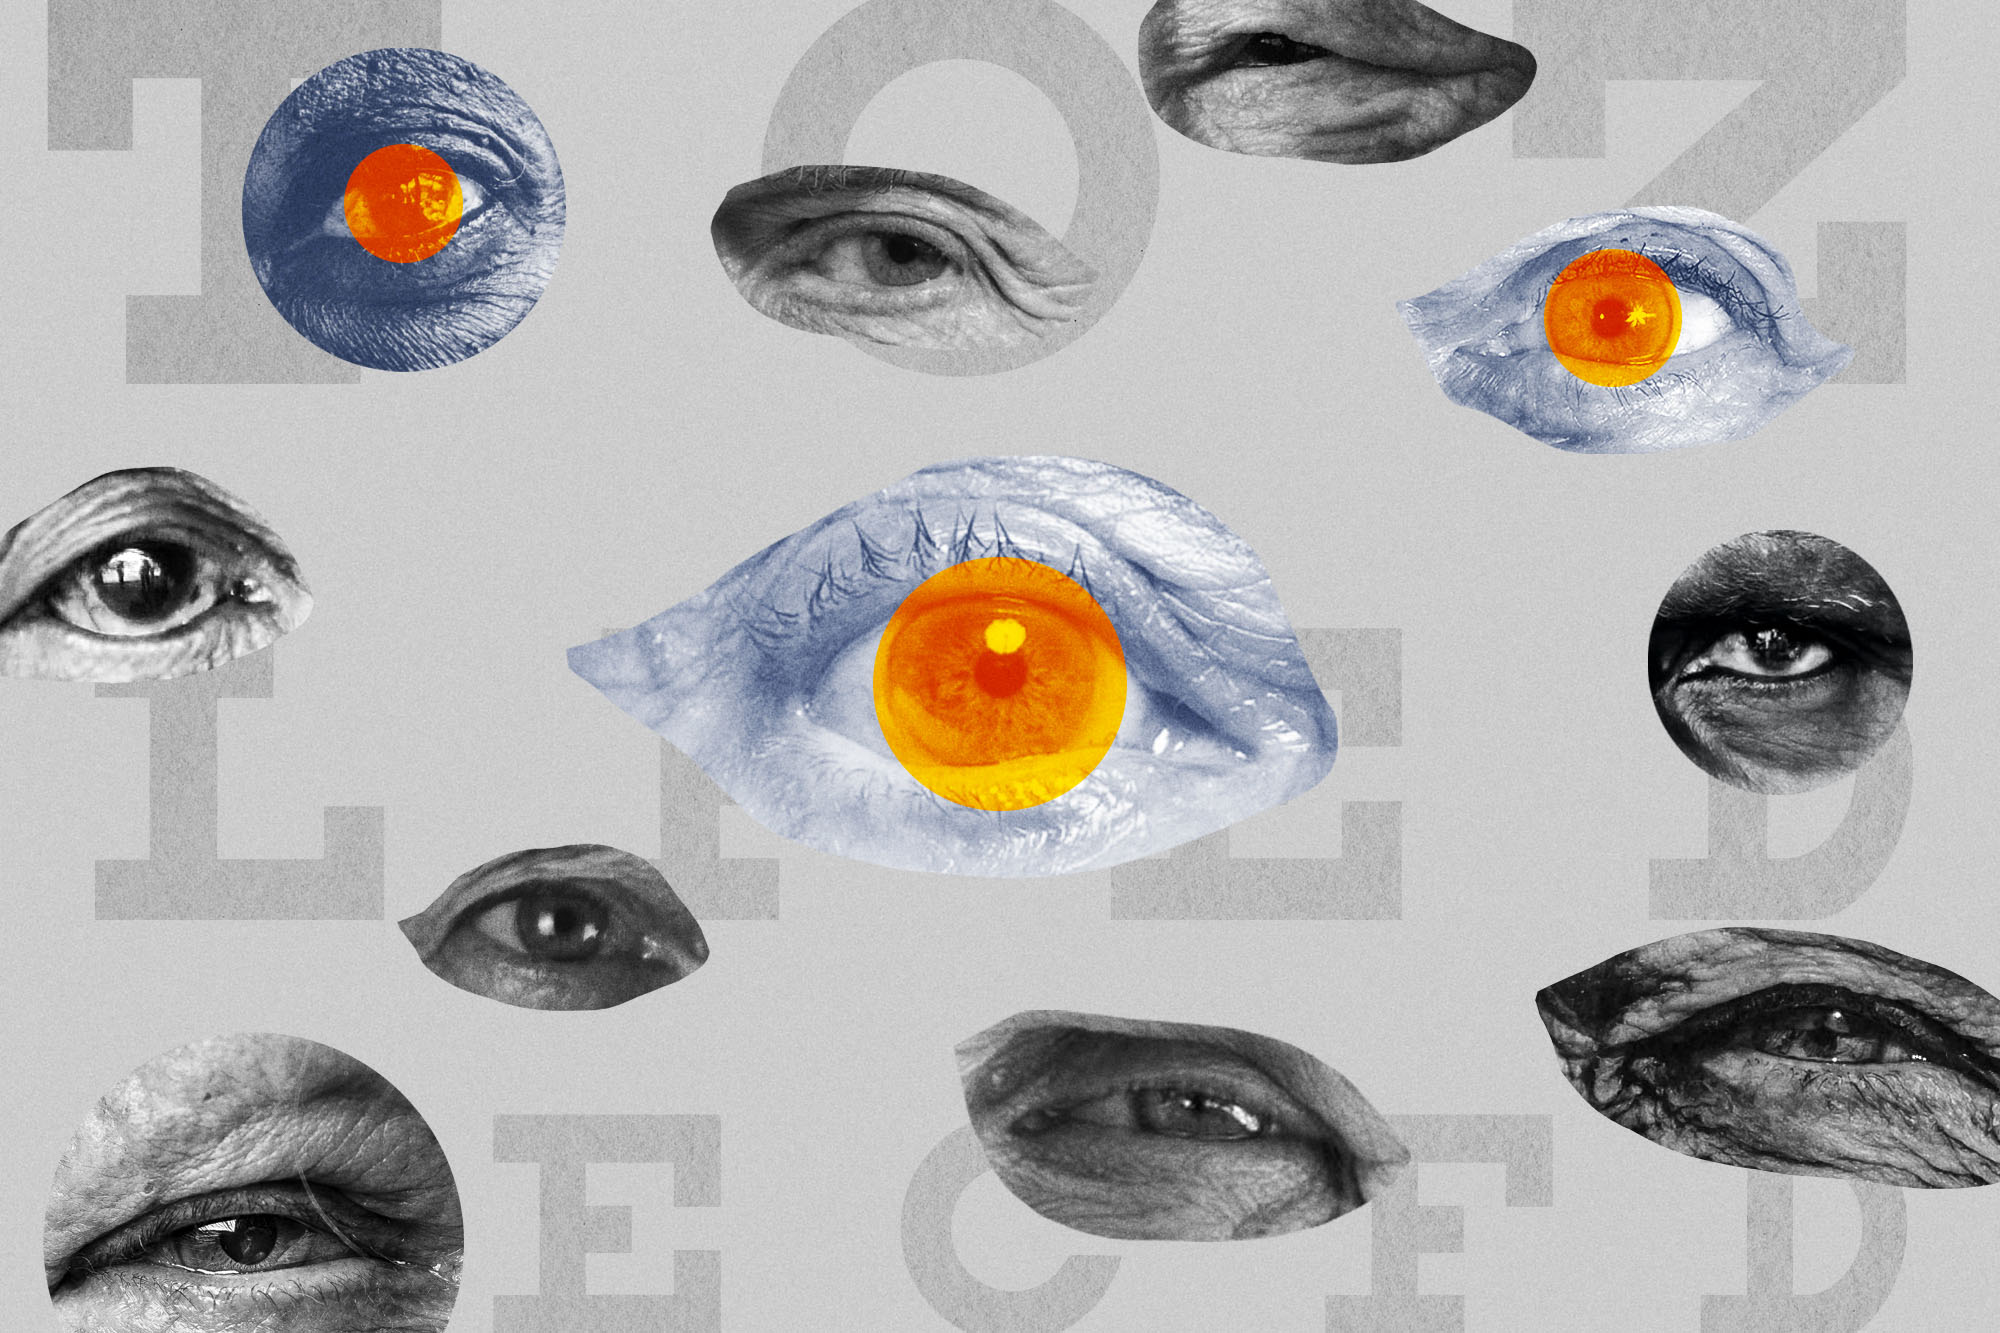 Illustration of eyes over top of an eye exam chart